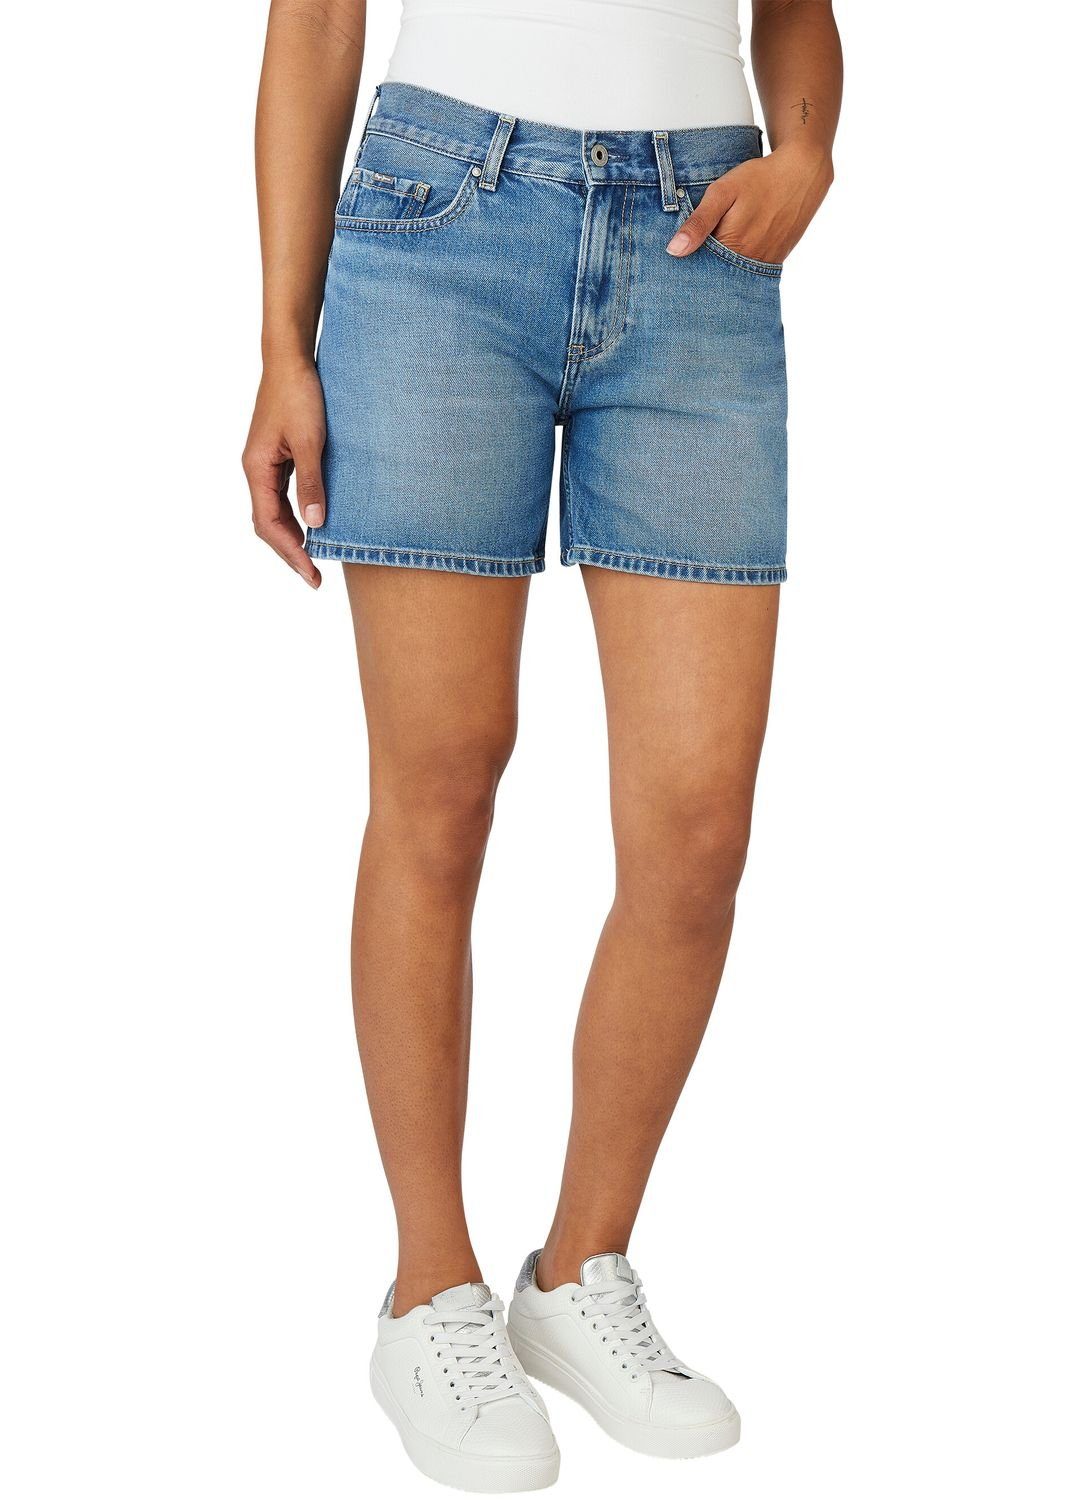 Jeansshorts Baumwolle MABLE Jeans Pepe aus